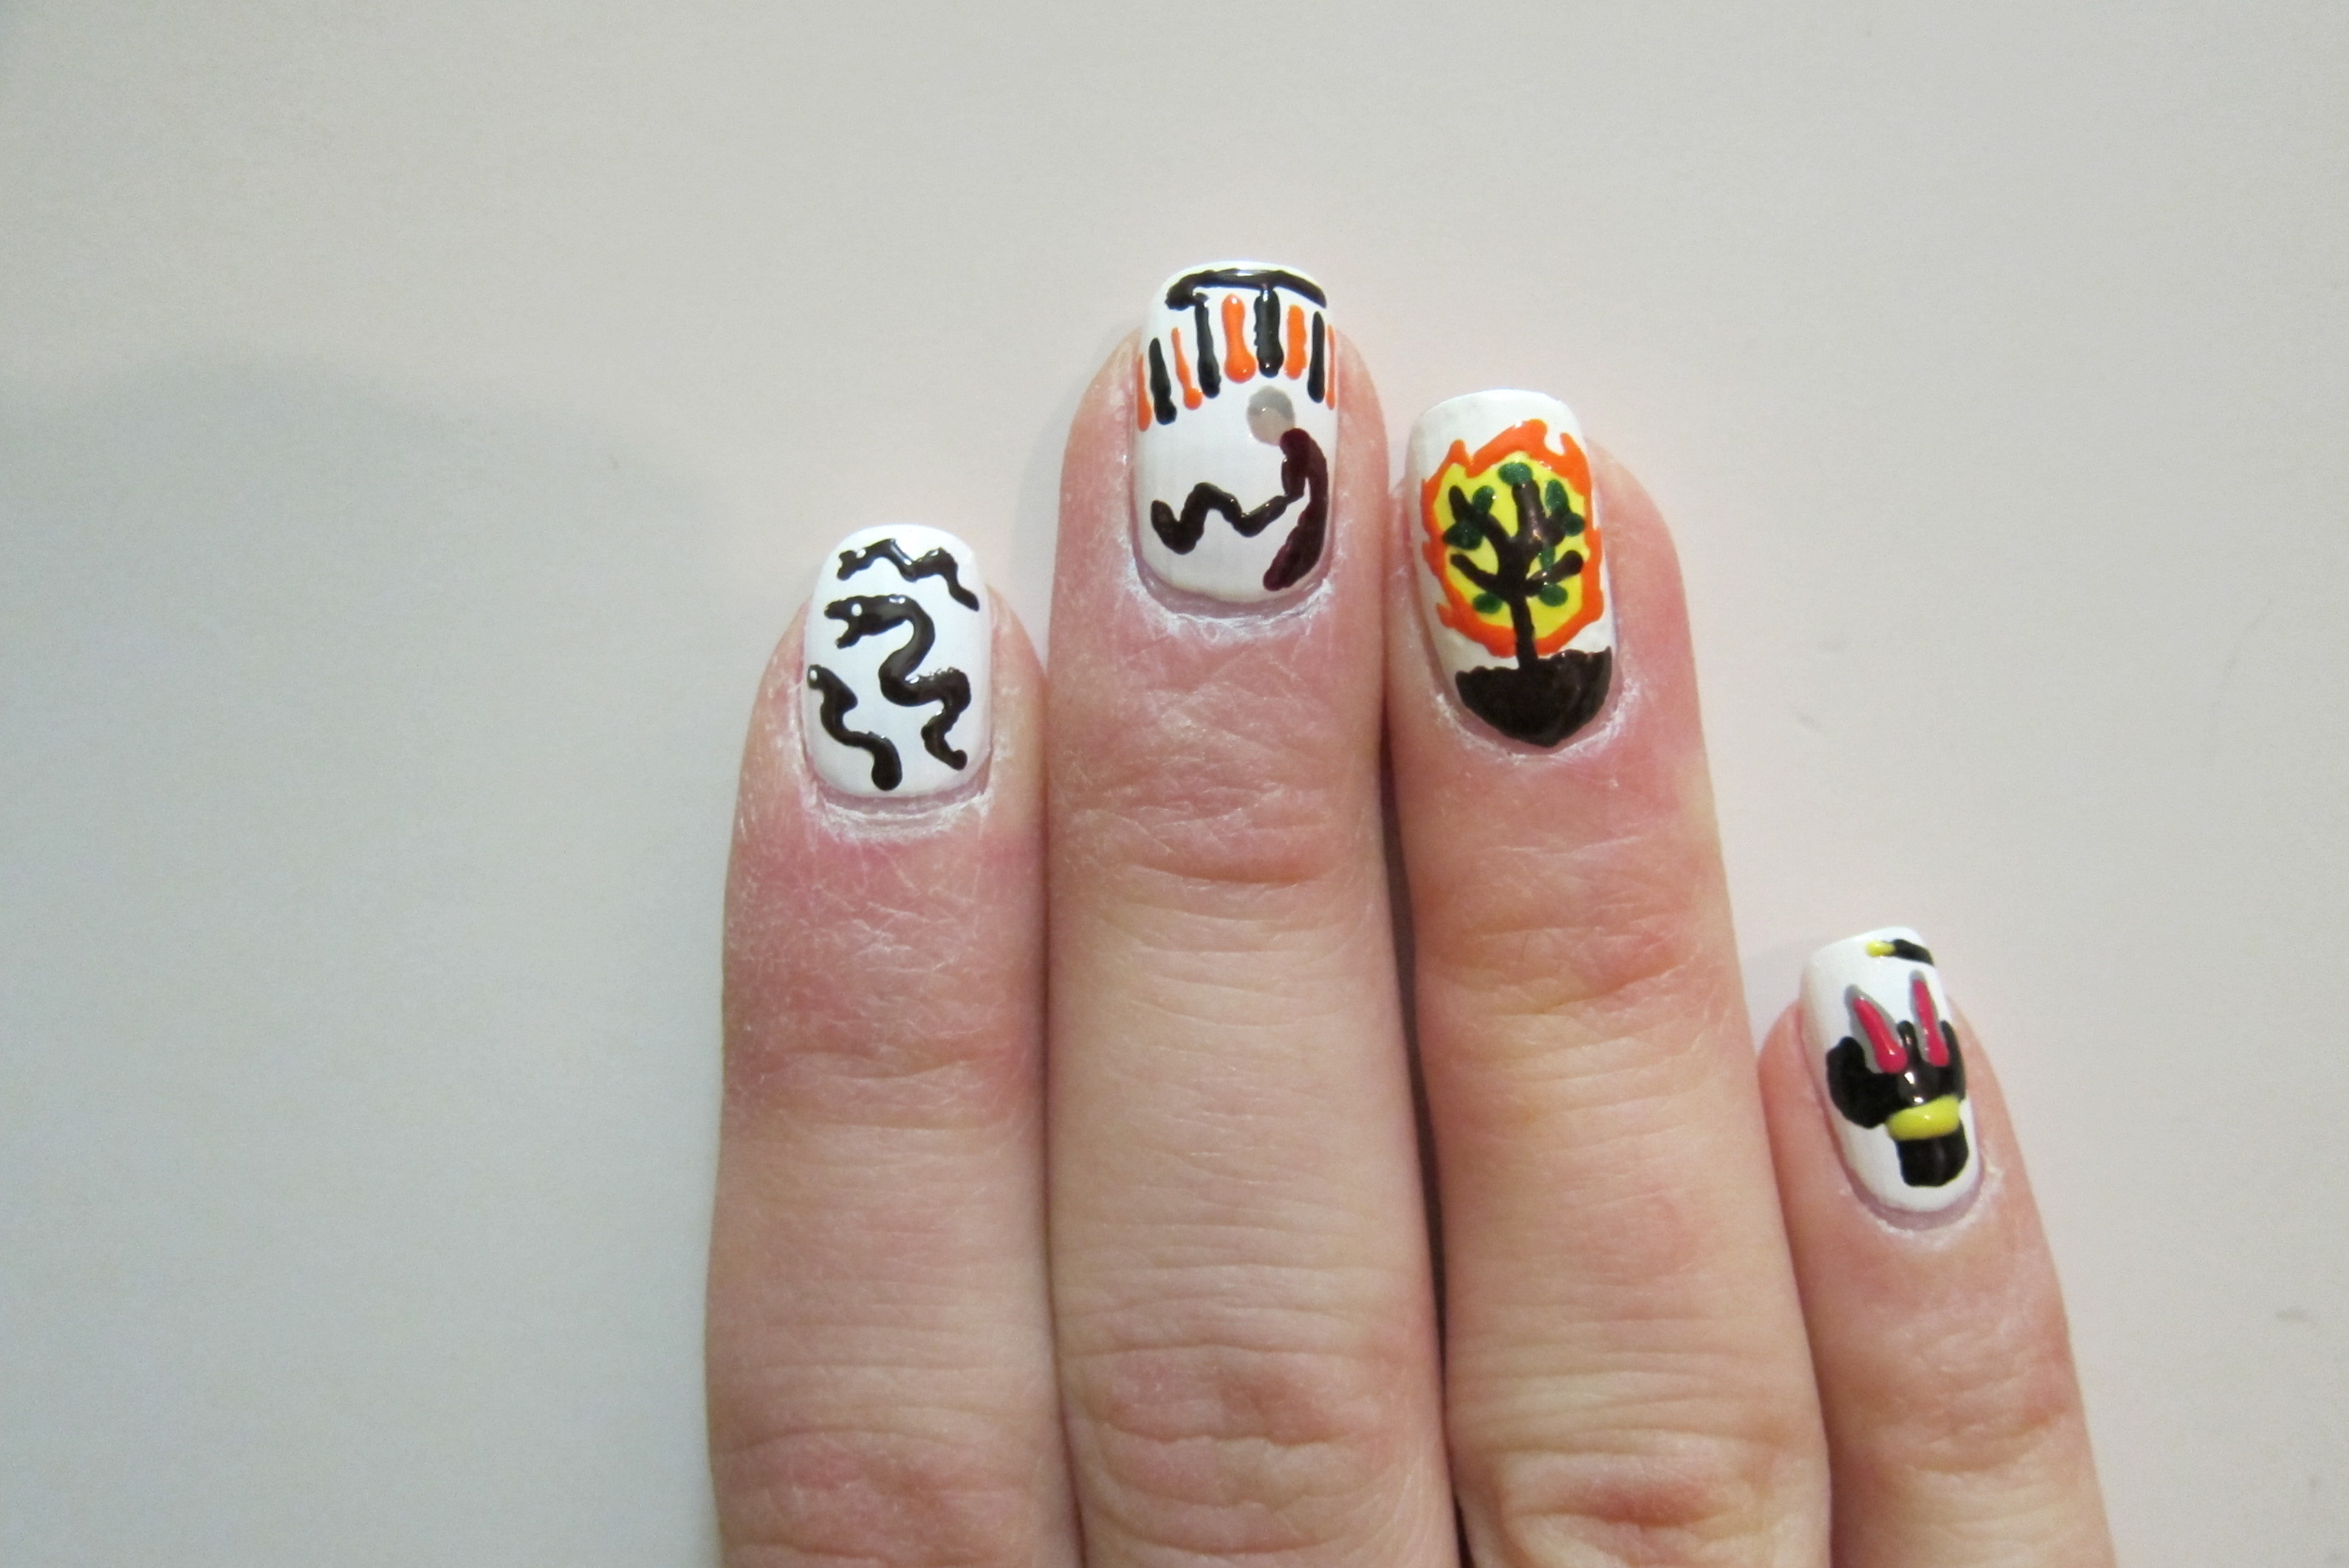 Nail art has been in existence since ancient times, with Egyptians and